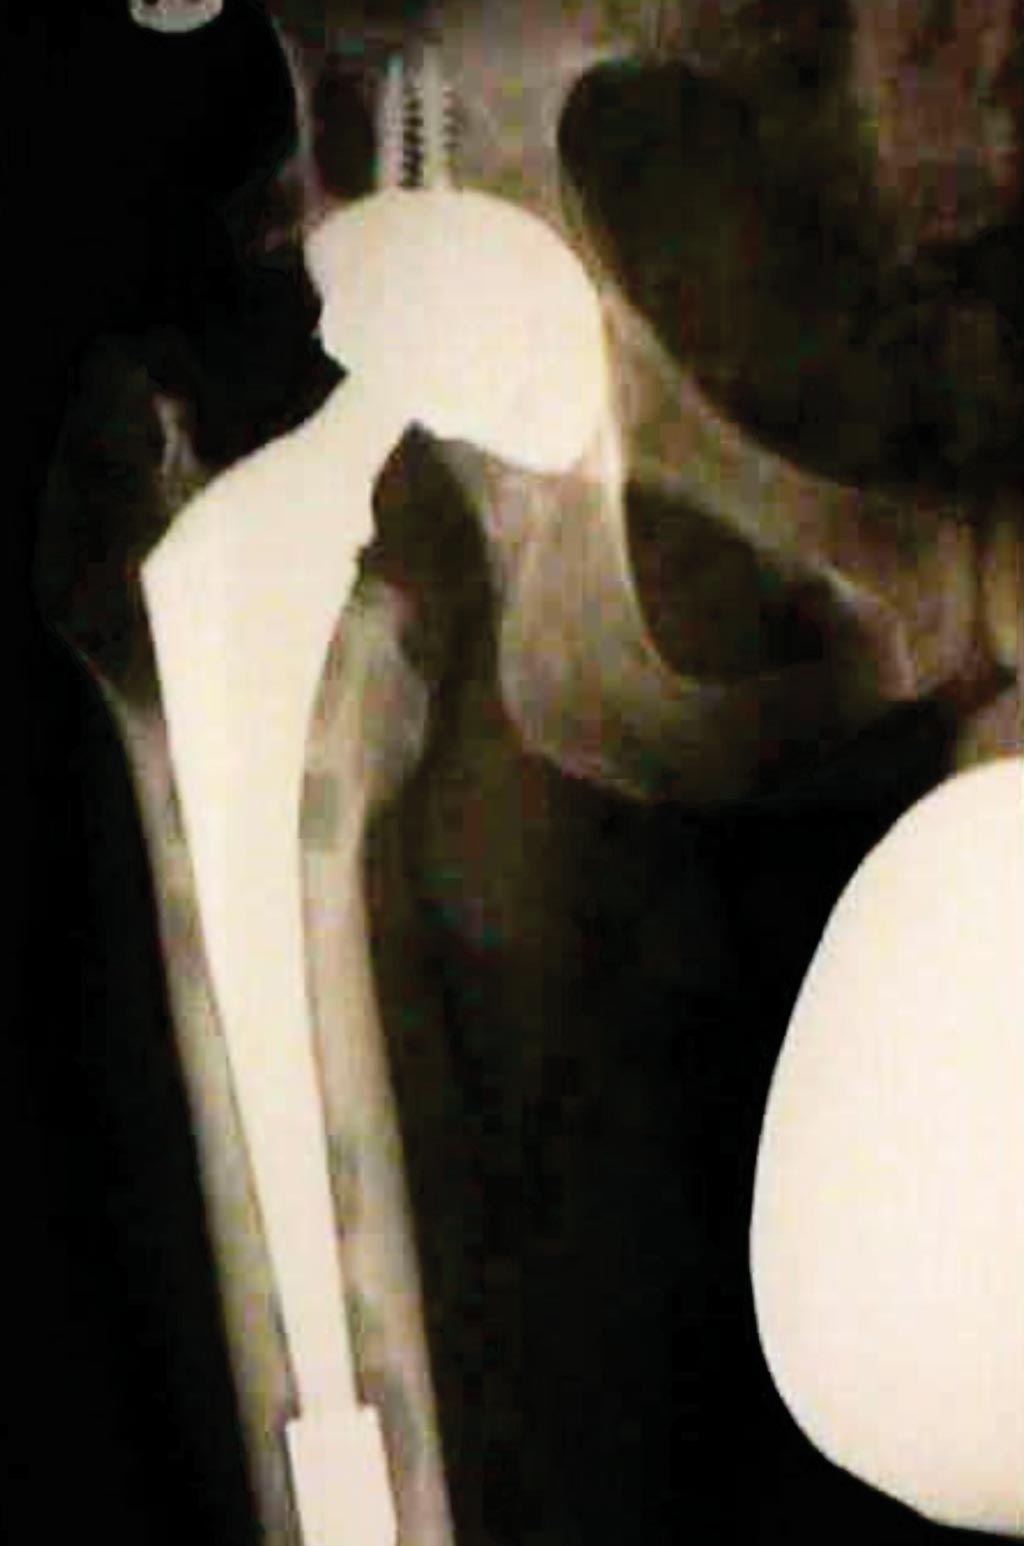 Image: A radiograph of 50-year-old patient with a well-placed acetabular cup against the tear drop and well placed femoral stem; after seven years, the patient has developed extensive osteolysis (Photo courtesy of Duke University Medical Center).